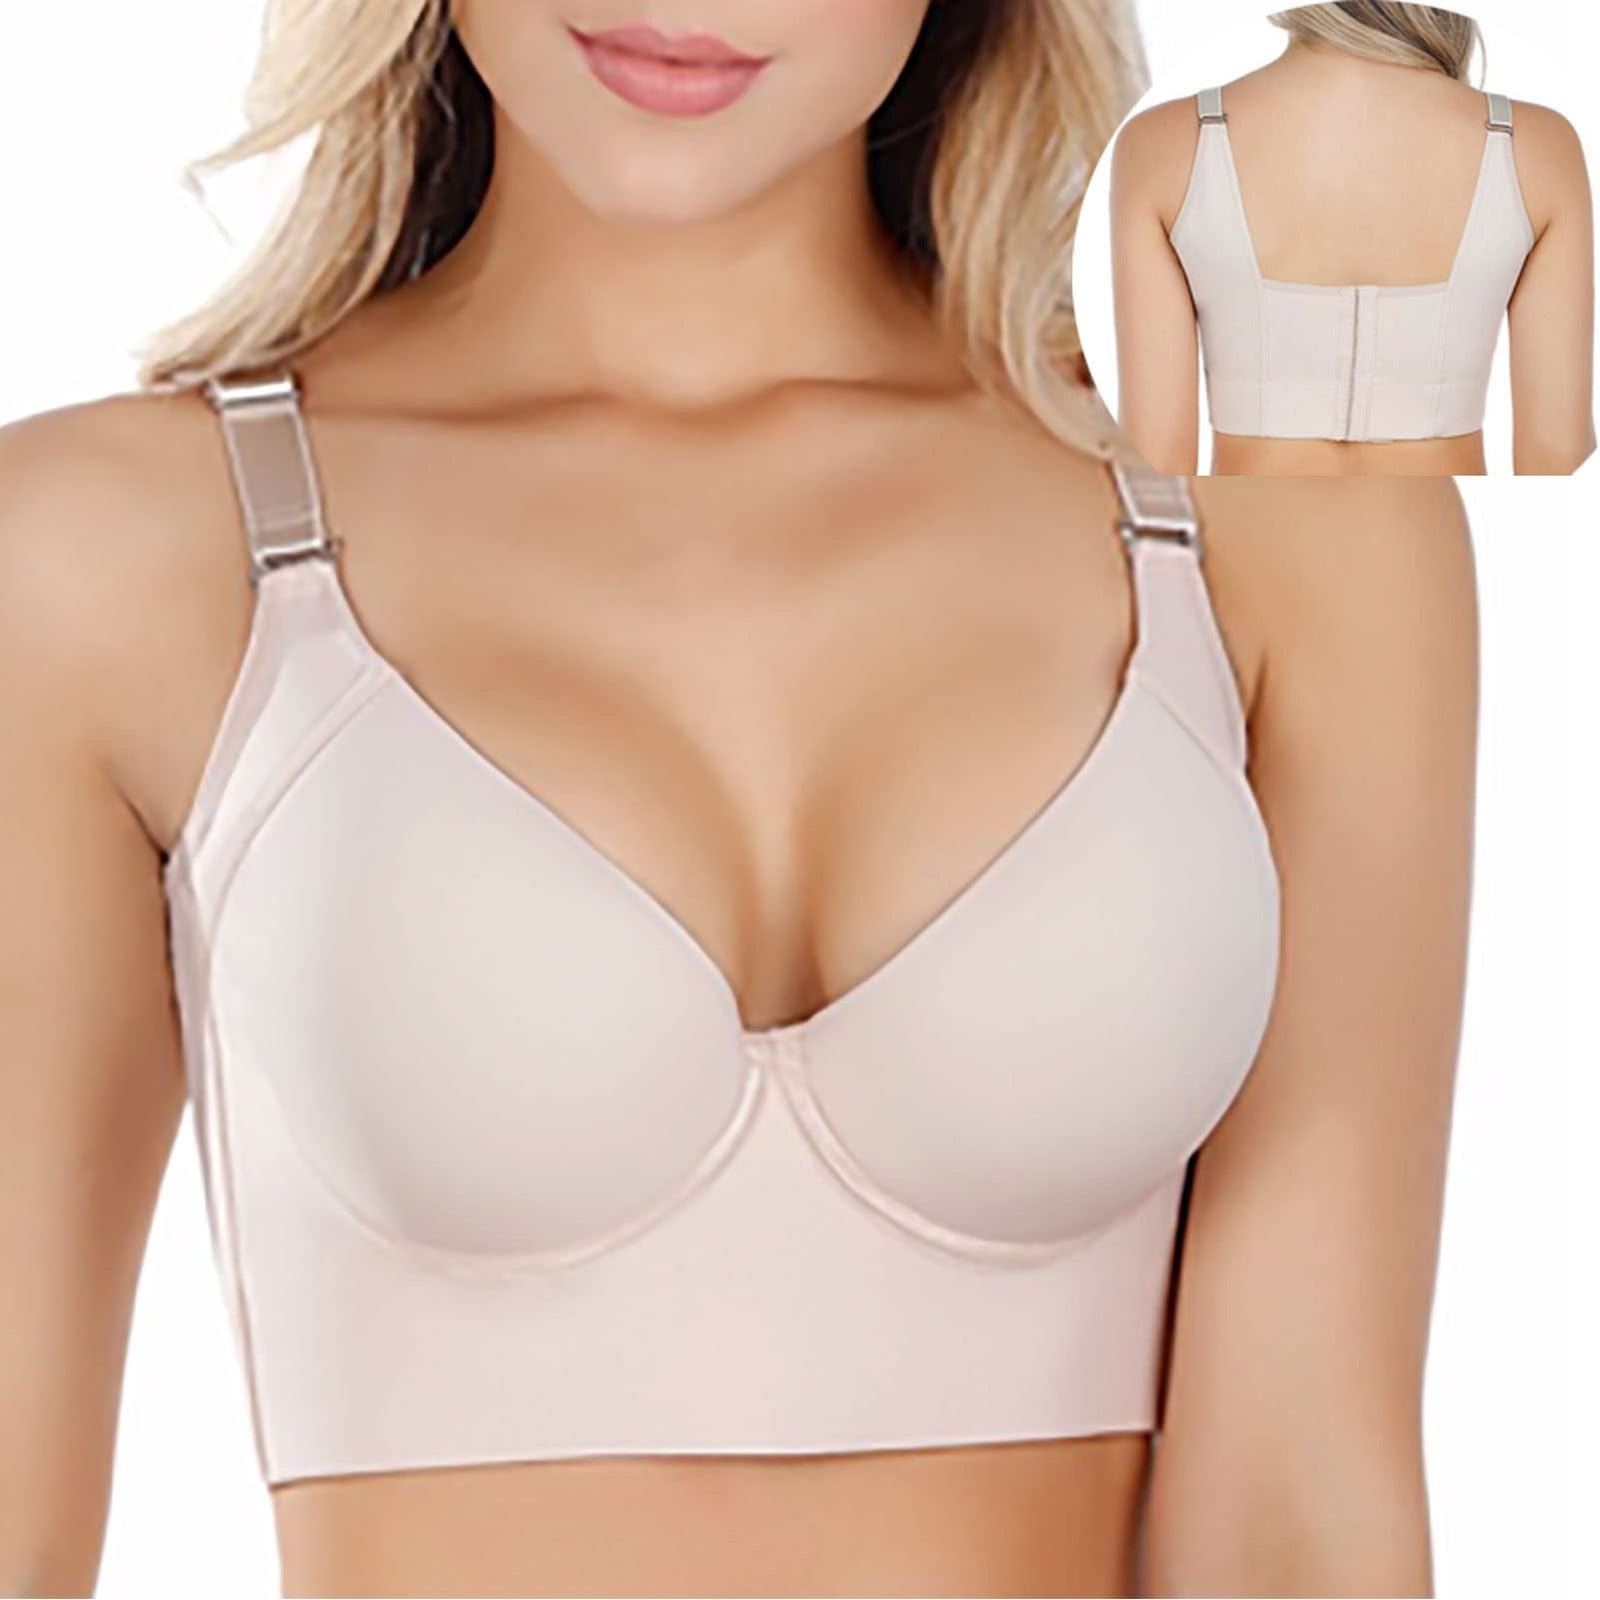 TOWED22 Bras for Women,Women's Plus Size Bra Full Coverage Underwire  Support T Shirt,Beige